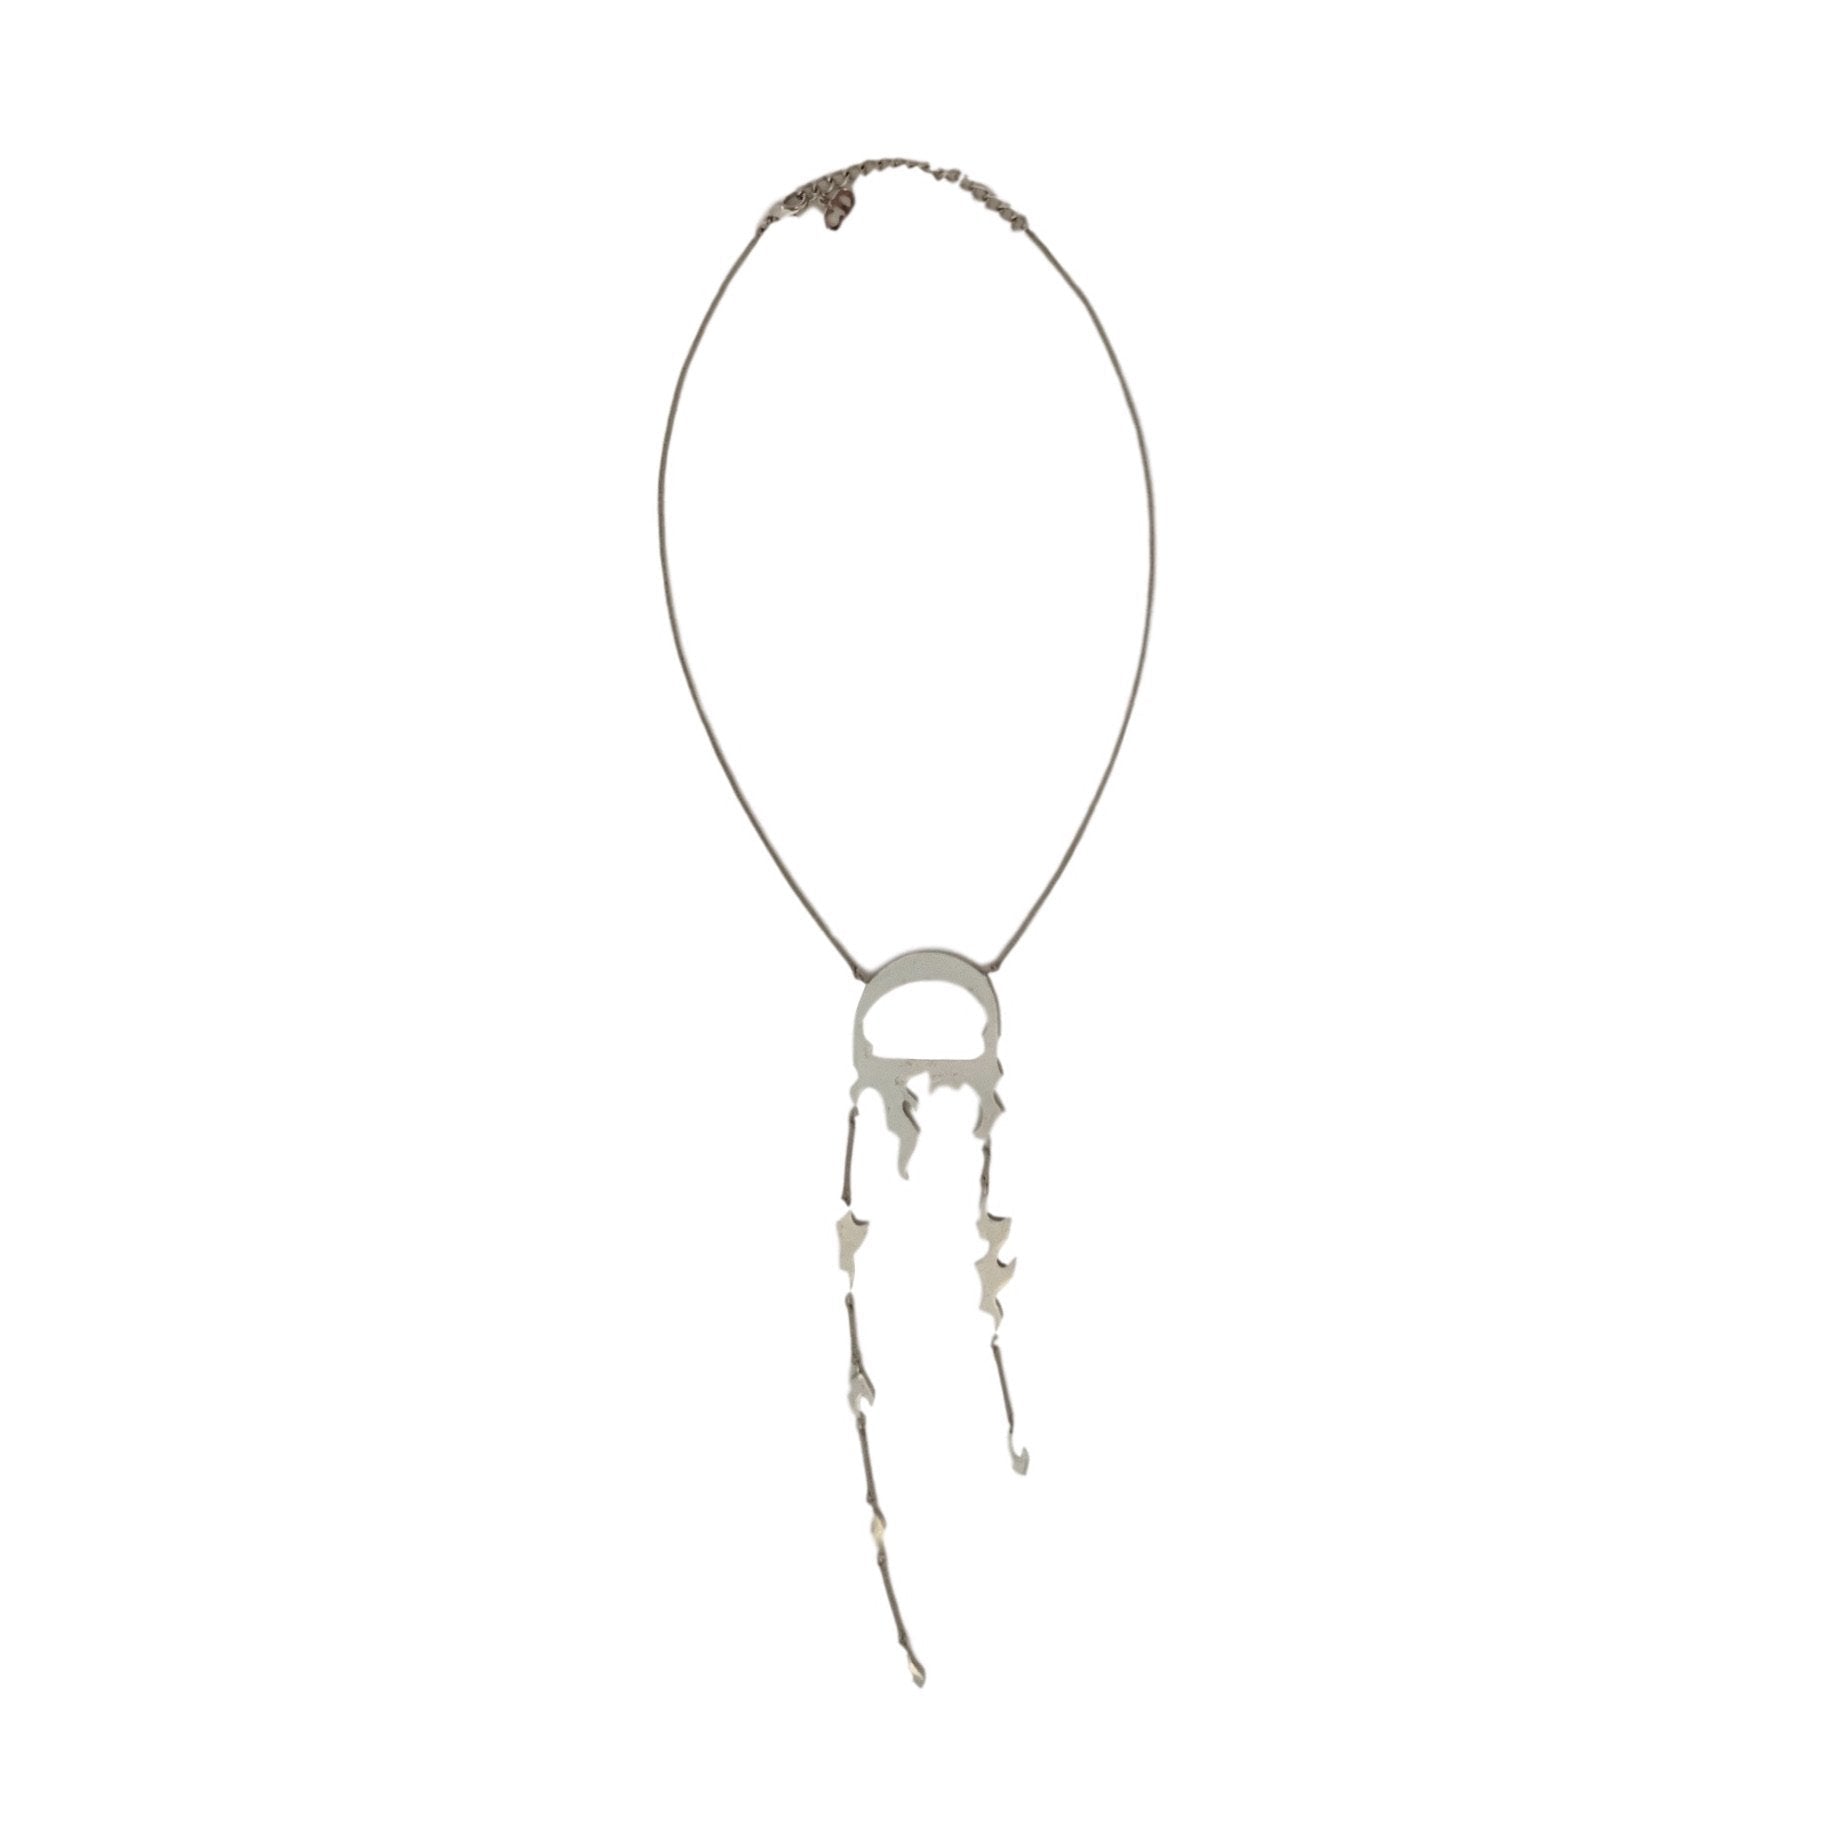 Dior Silver Flame Drop Necklace - Jewelry